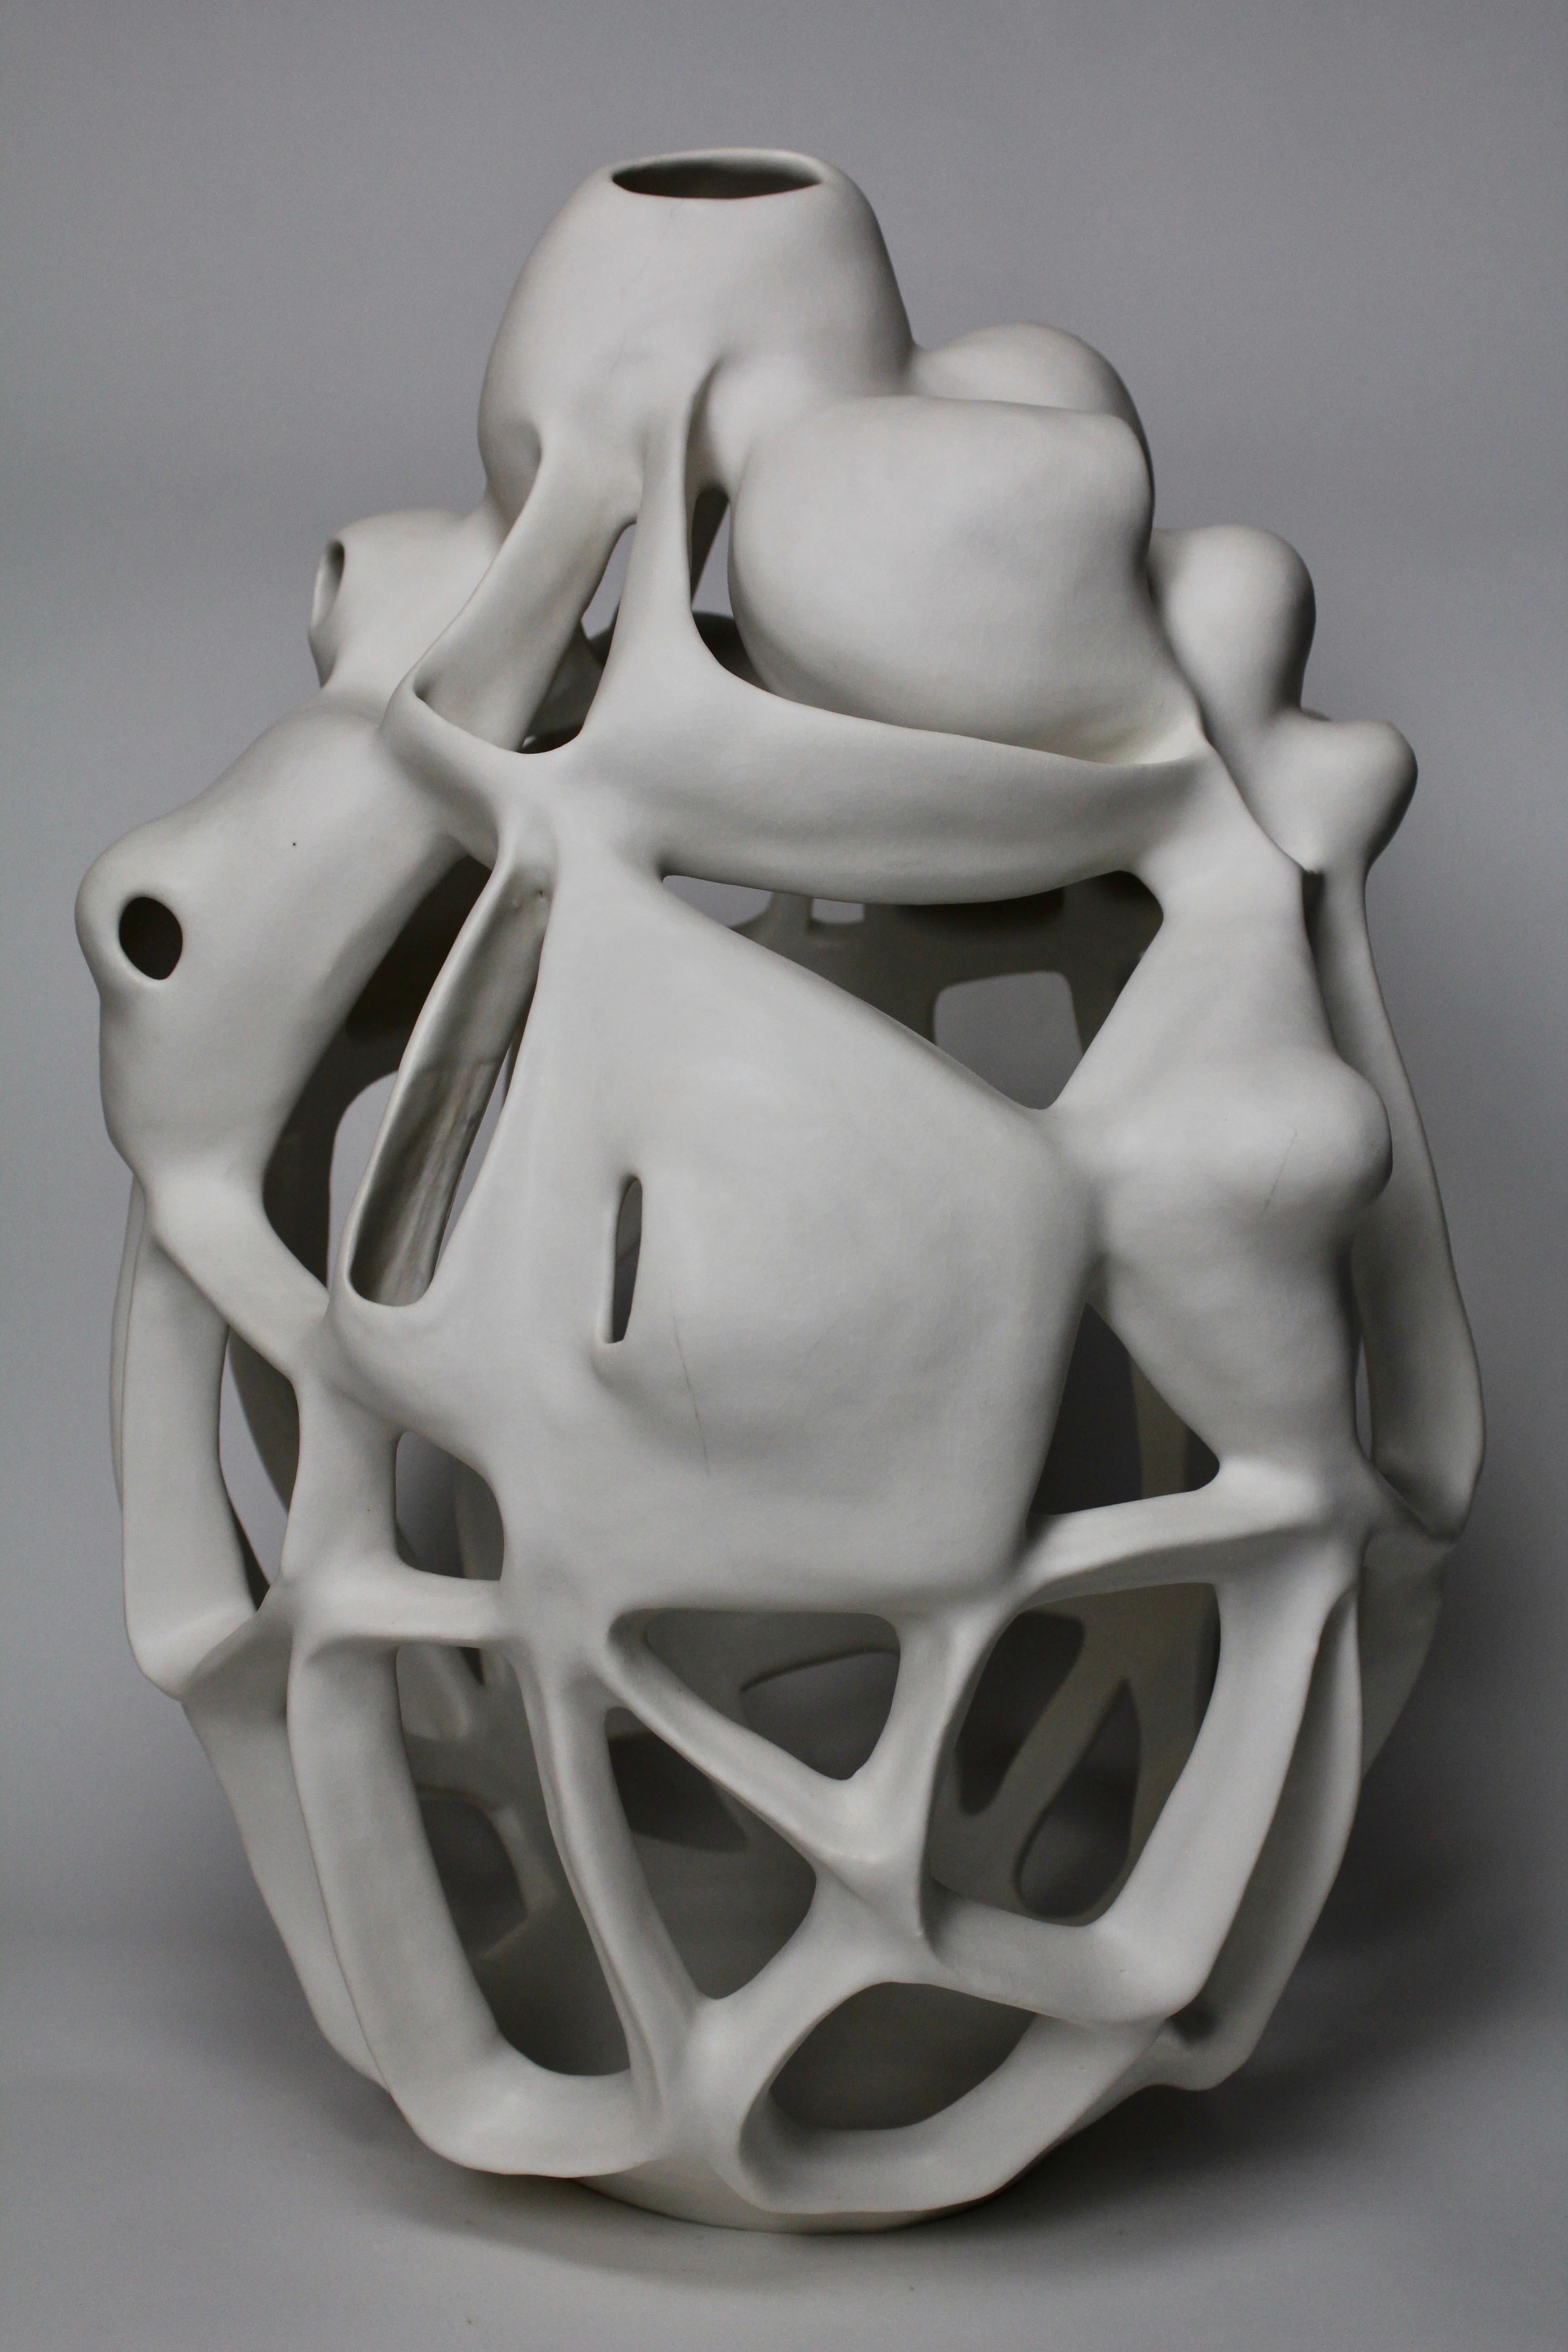 Joan Lurie Abstract Sculpture - Untitled #3780 - Porcelain geometric white sculpture 